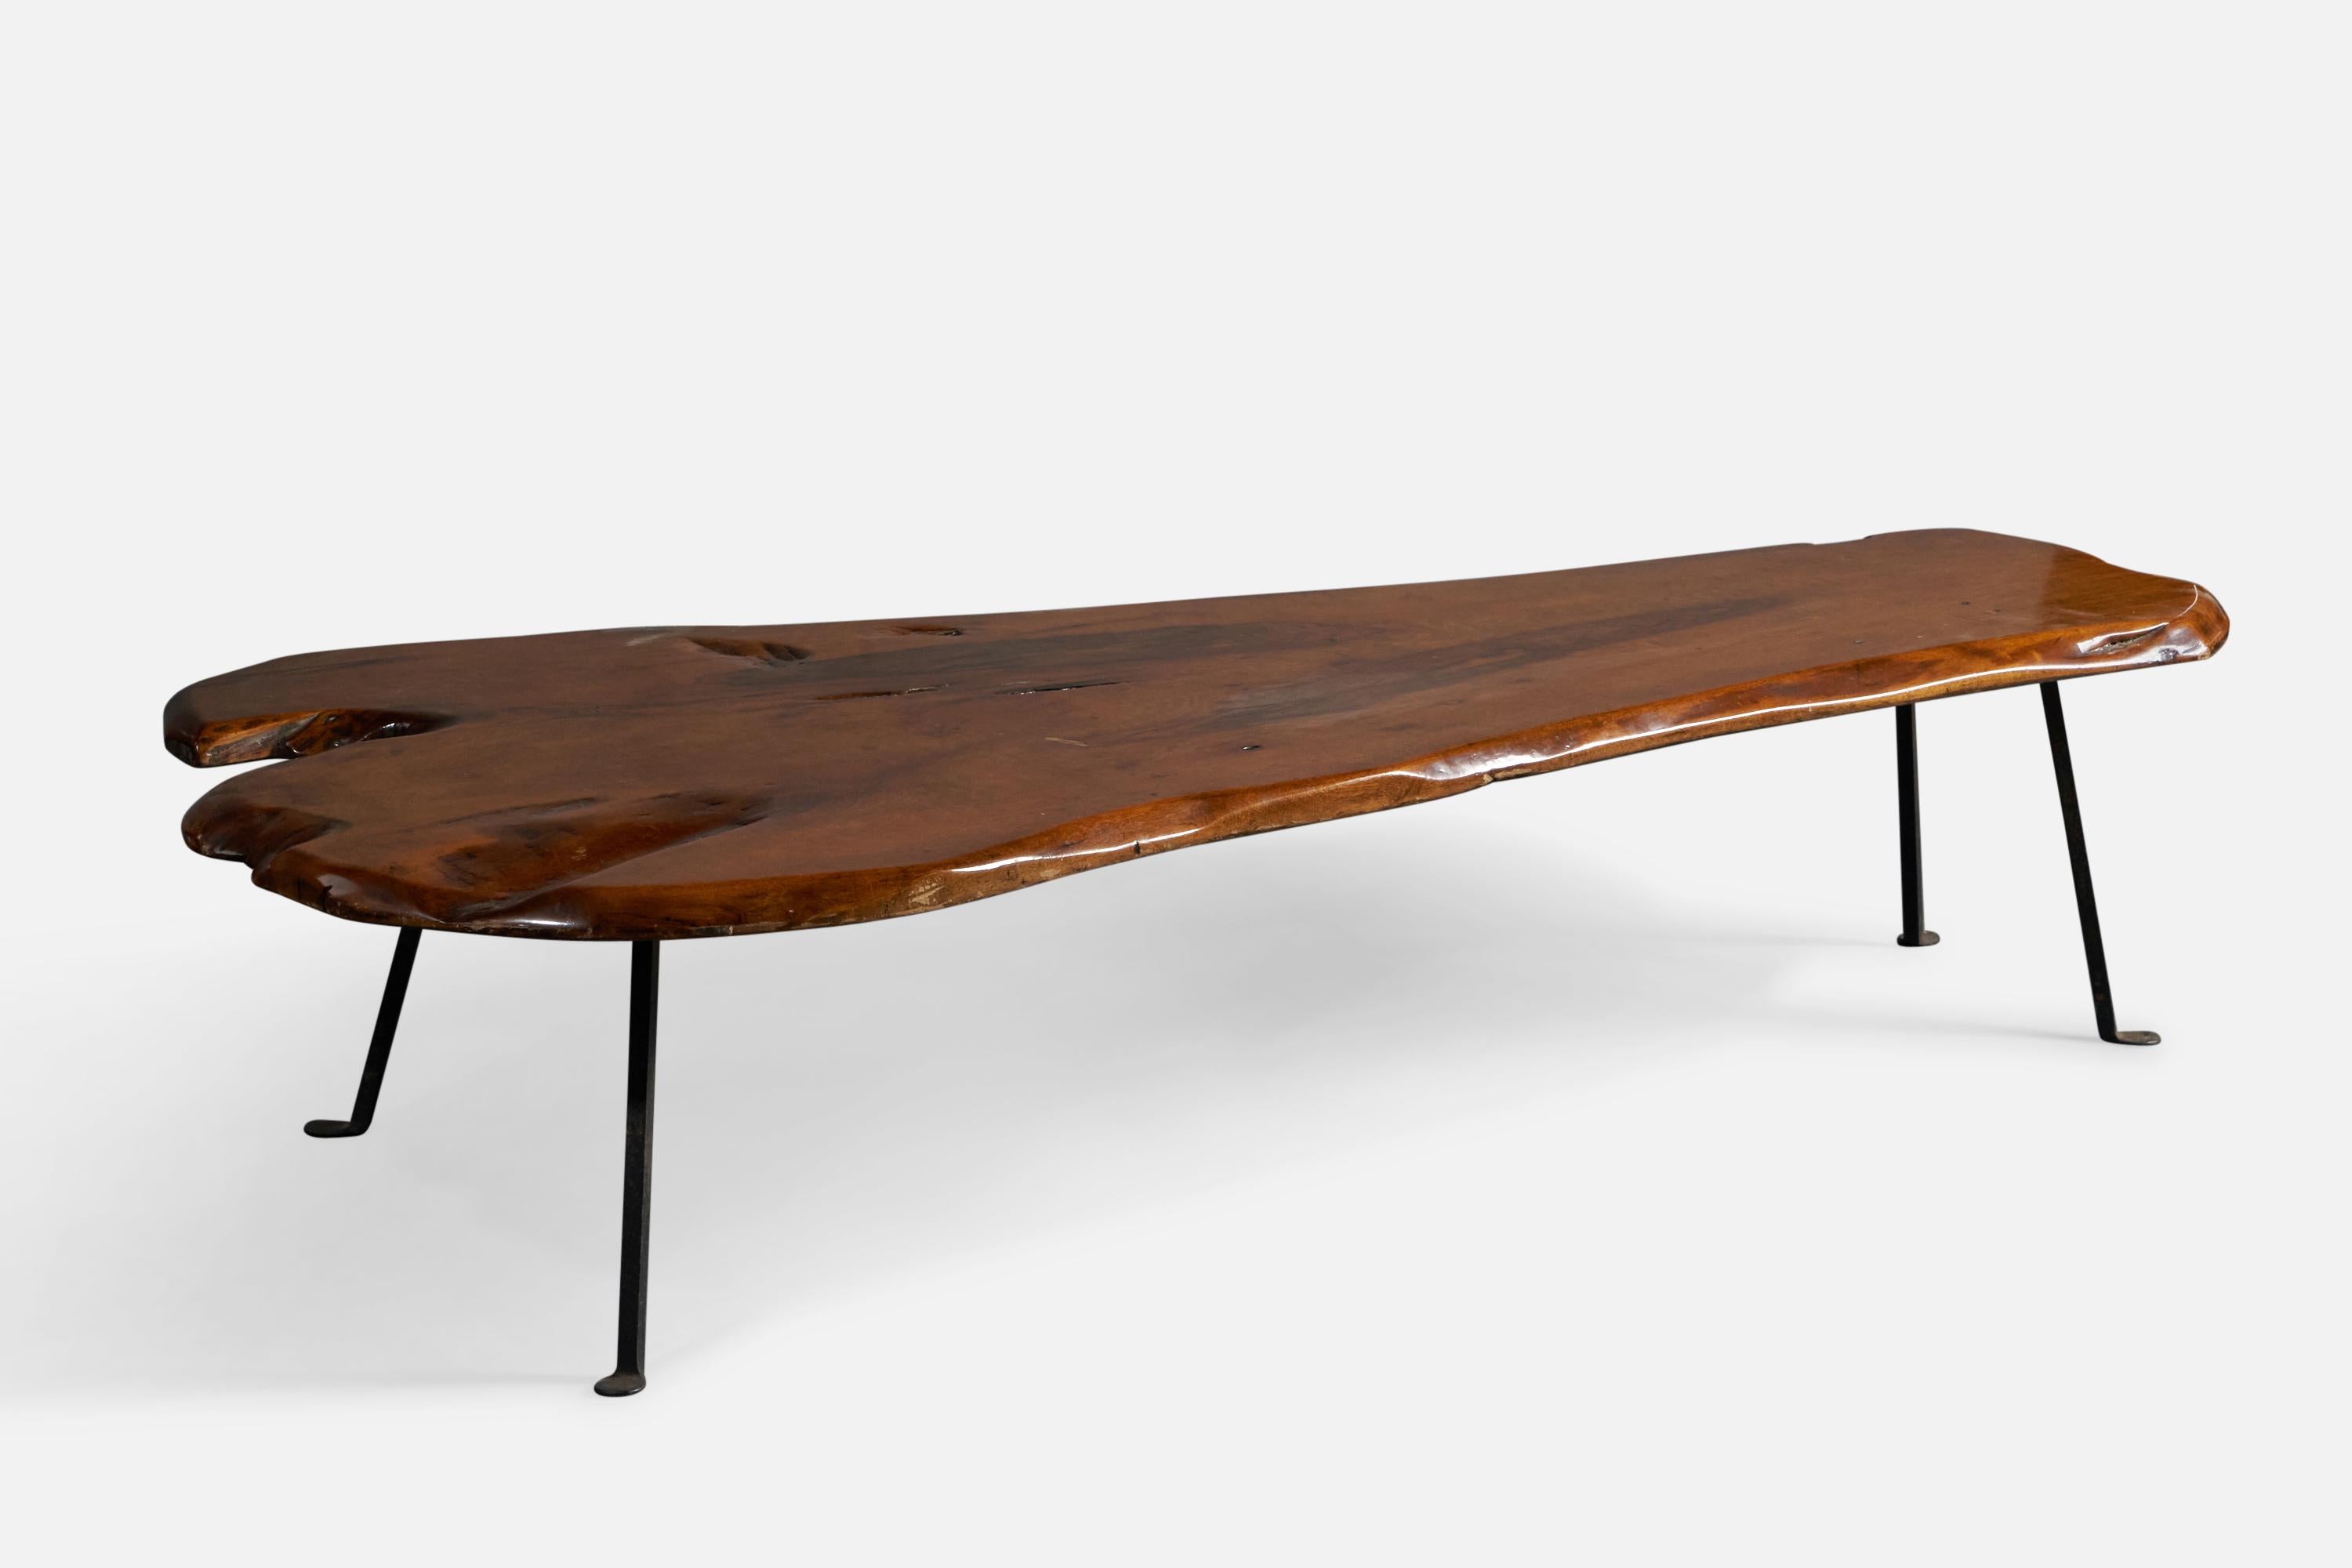 A burled walnut and black painted iron coffee table, designed and produced by Lila Swift + Donald Monell, USA, 1950s.